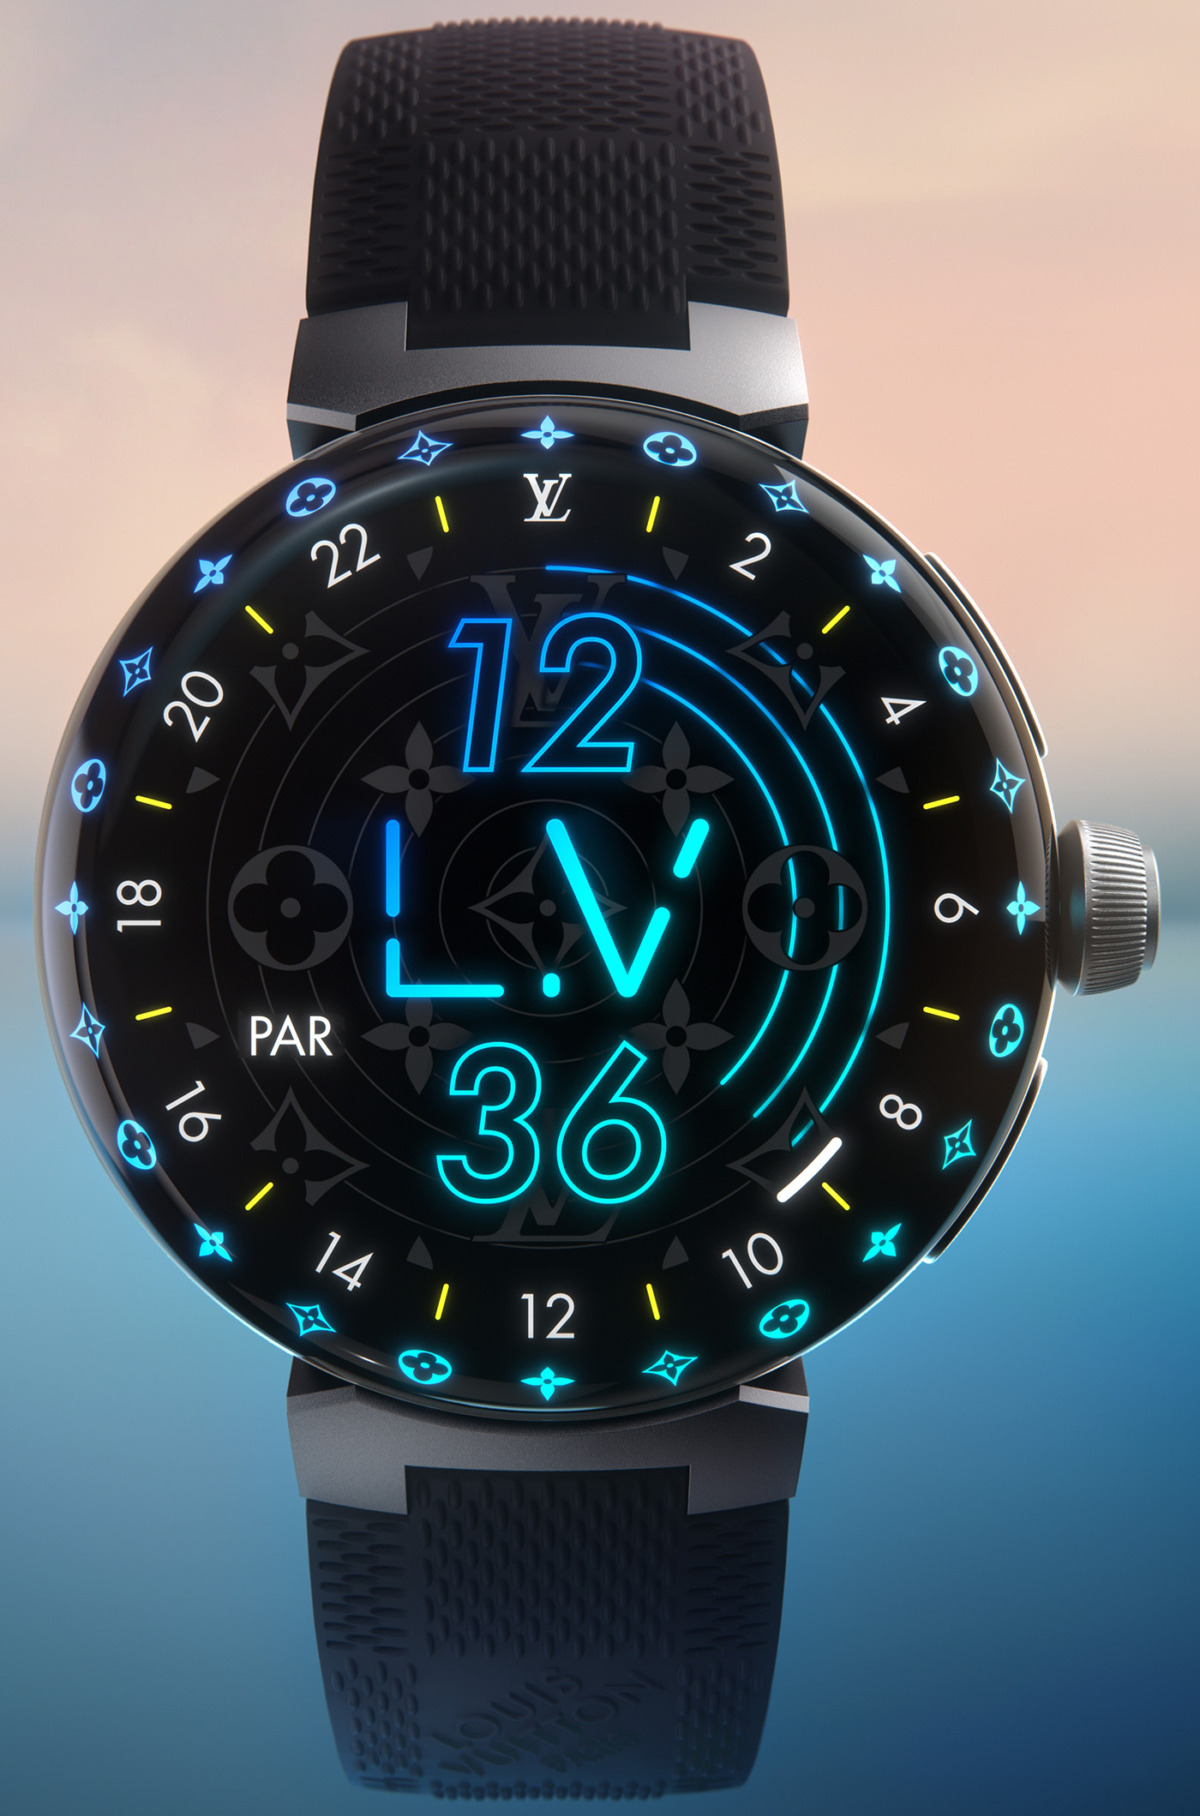 5 Cool Features That Make The Louis Vuitton Tambour Horizon Watch